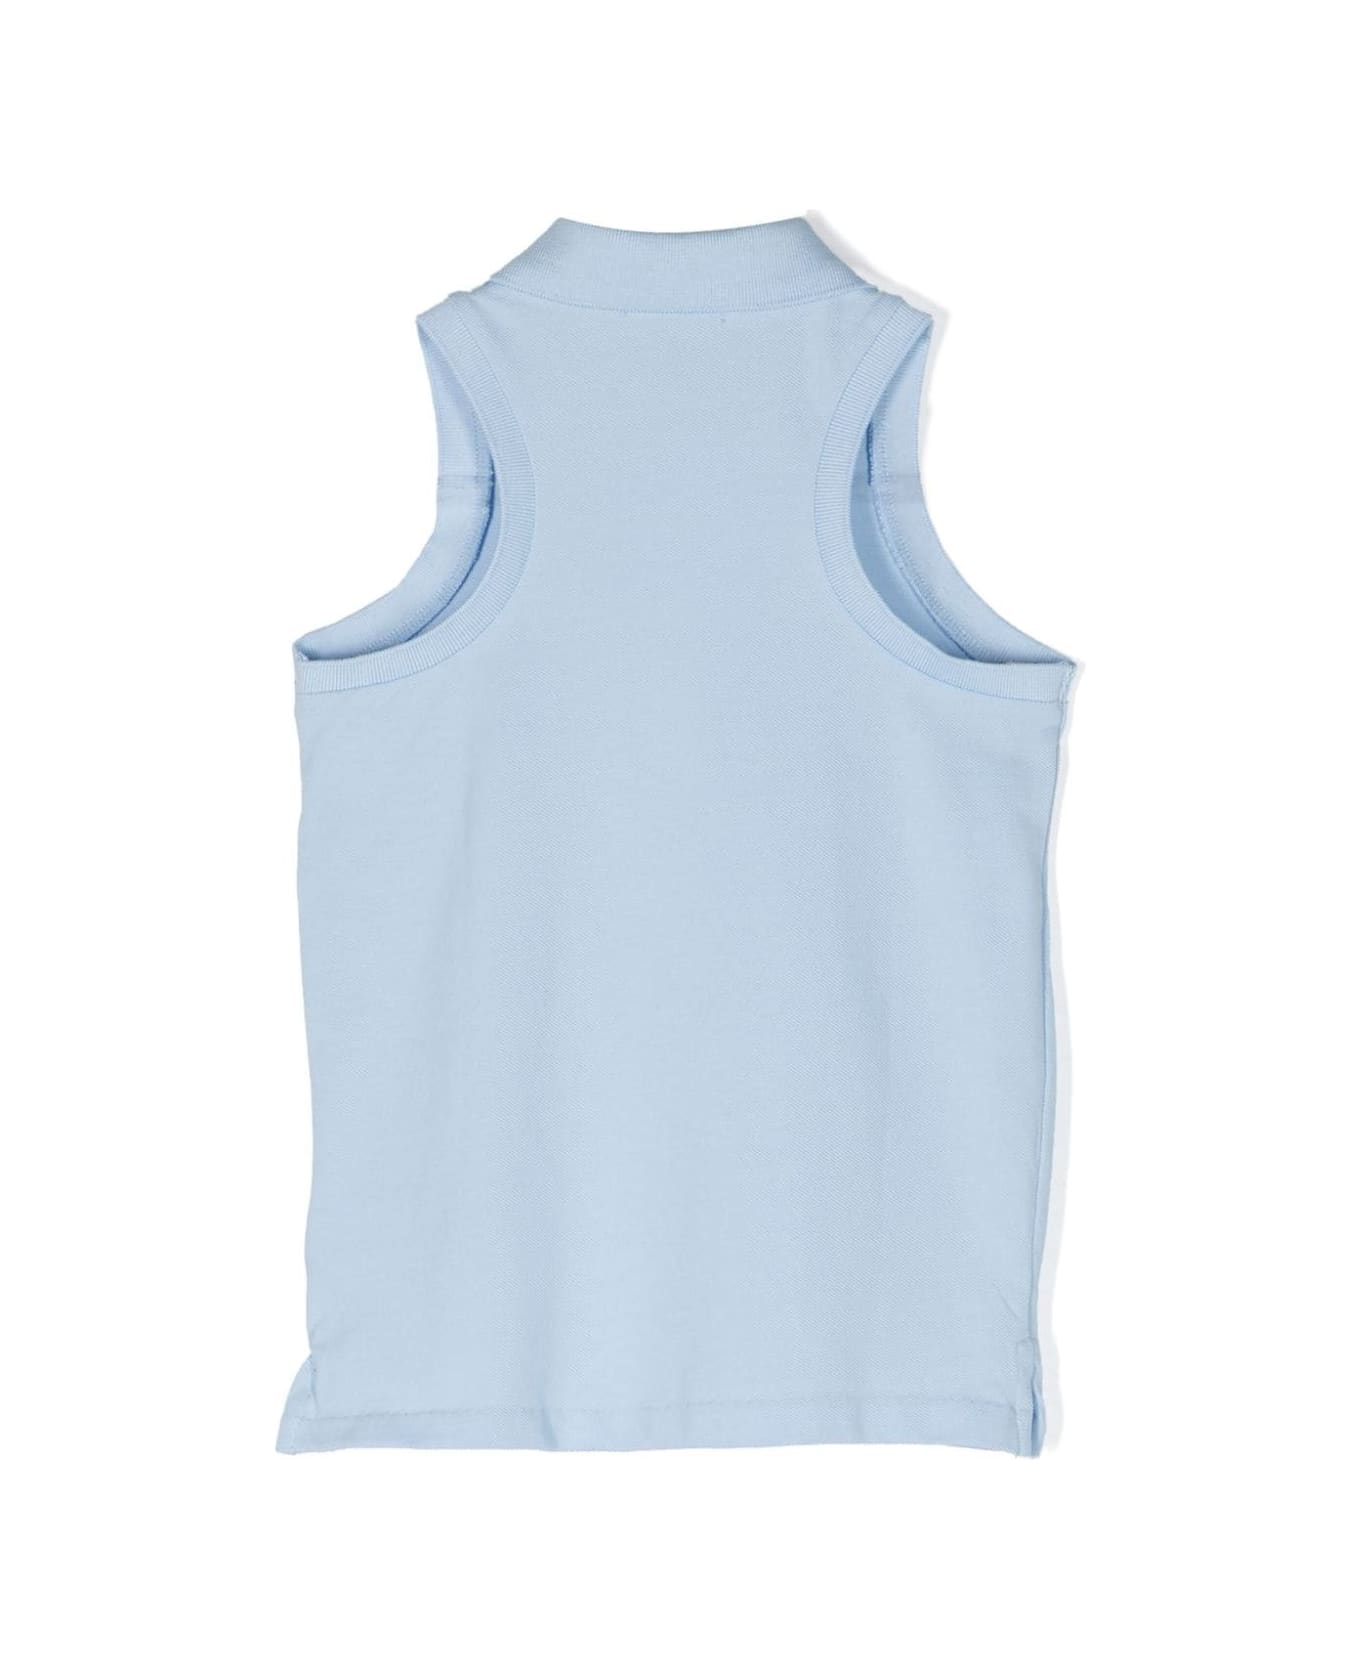 Ralph Lauren Light Blue Sleeveless Polo With Pony - Blue Tシャツ＆ポロシャツ